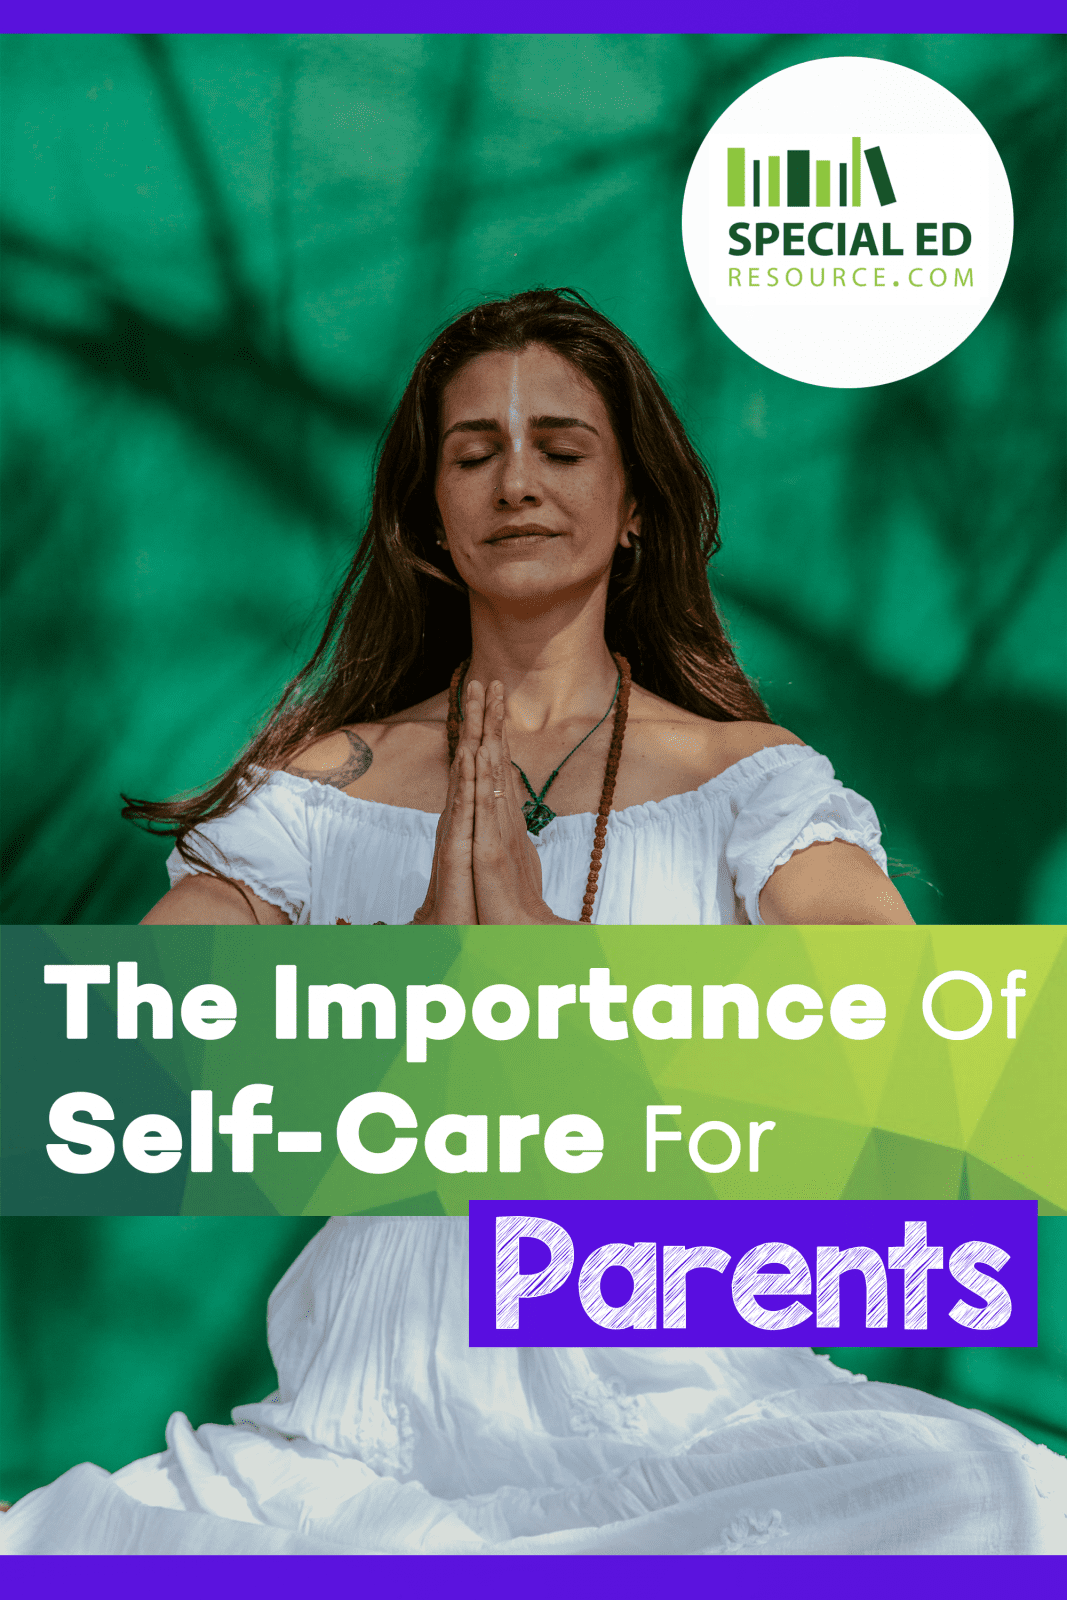 The Importance Of Self-Care For Parents